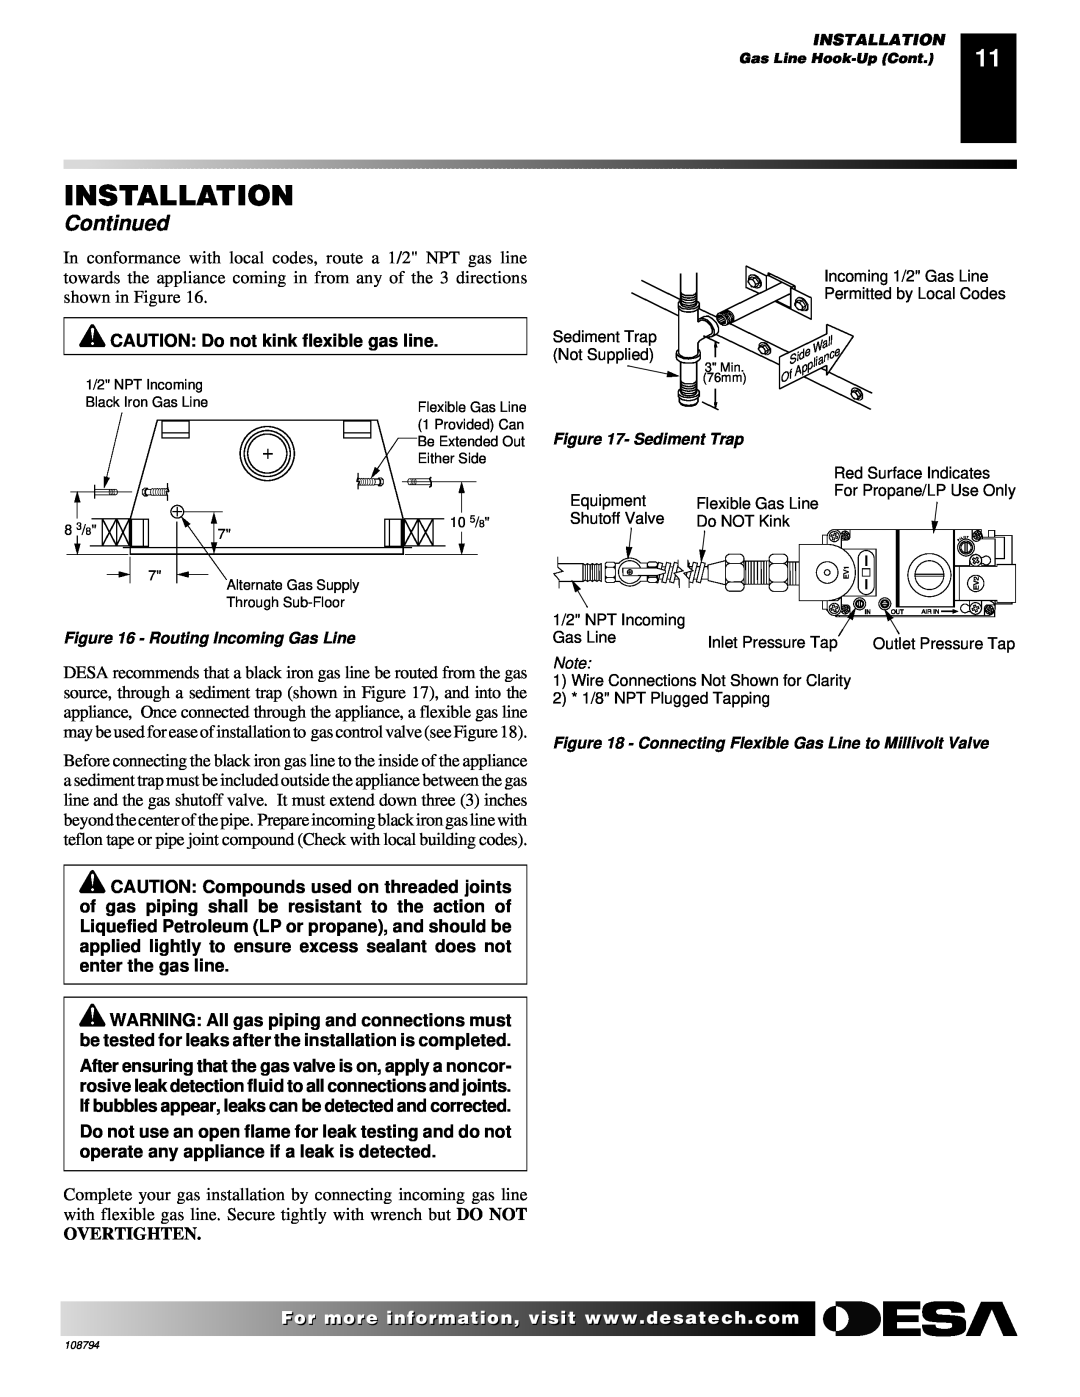 Desa P324E, VP324E, P325E, VP325E, P325E(B), VP325E(B) Installation, Continued, CAUTION Do not kink flexible gas line 